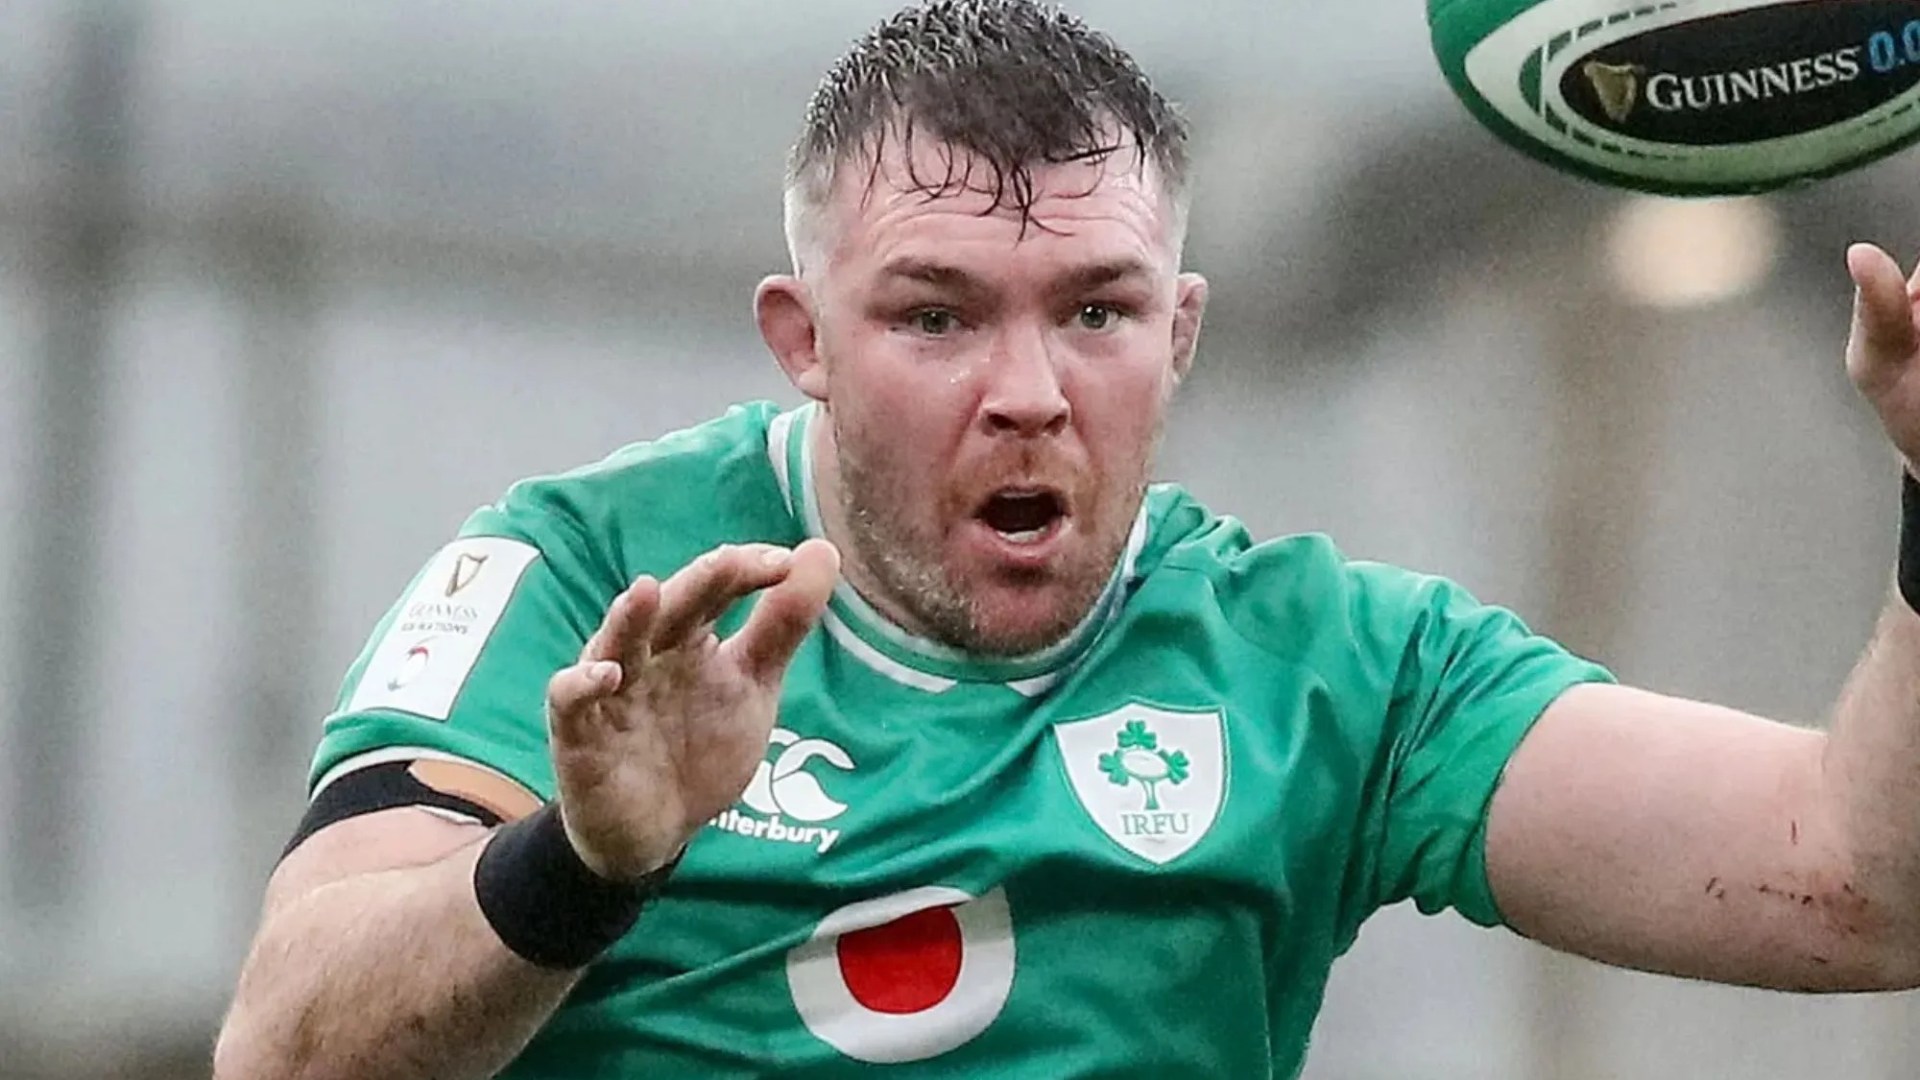 Peter O'Mahony warned he faces 'stiff competition' to keep his place in Ireland team despite new Munster contract